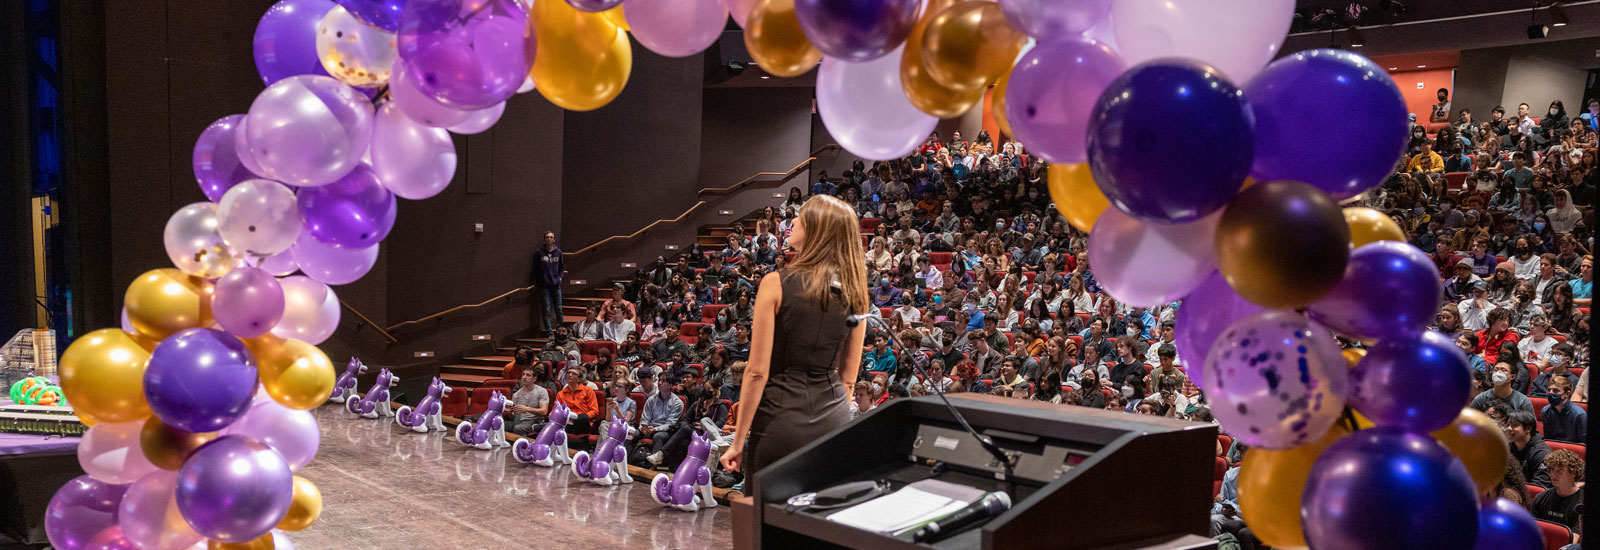 A woman standing on stage at a UW event